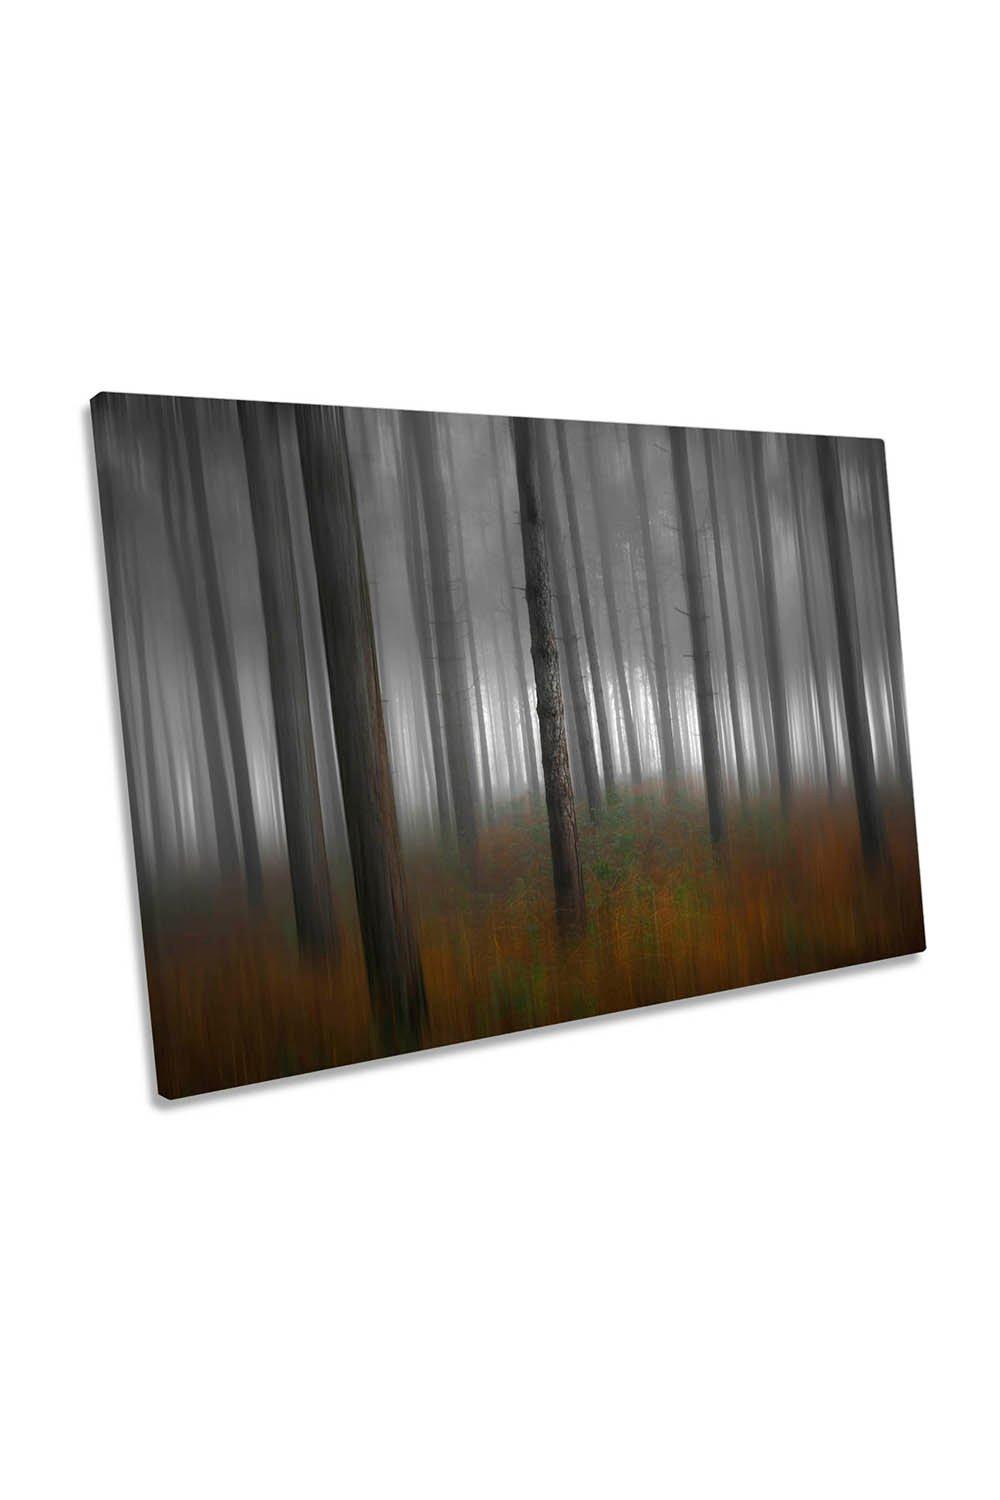 Forest Abstract Trees Brown and Grey Canvas Wall Art Picture Print